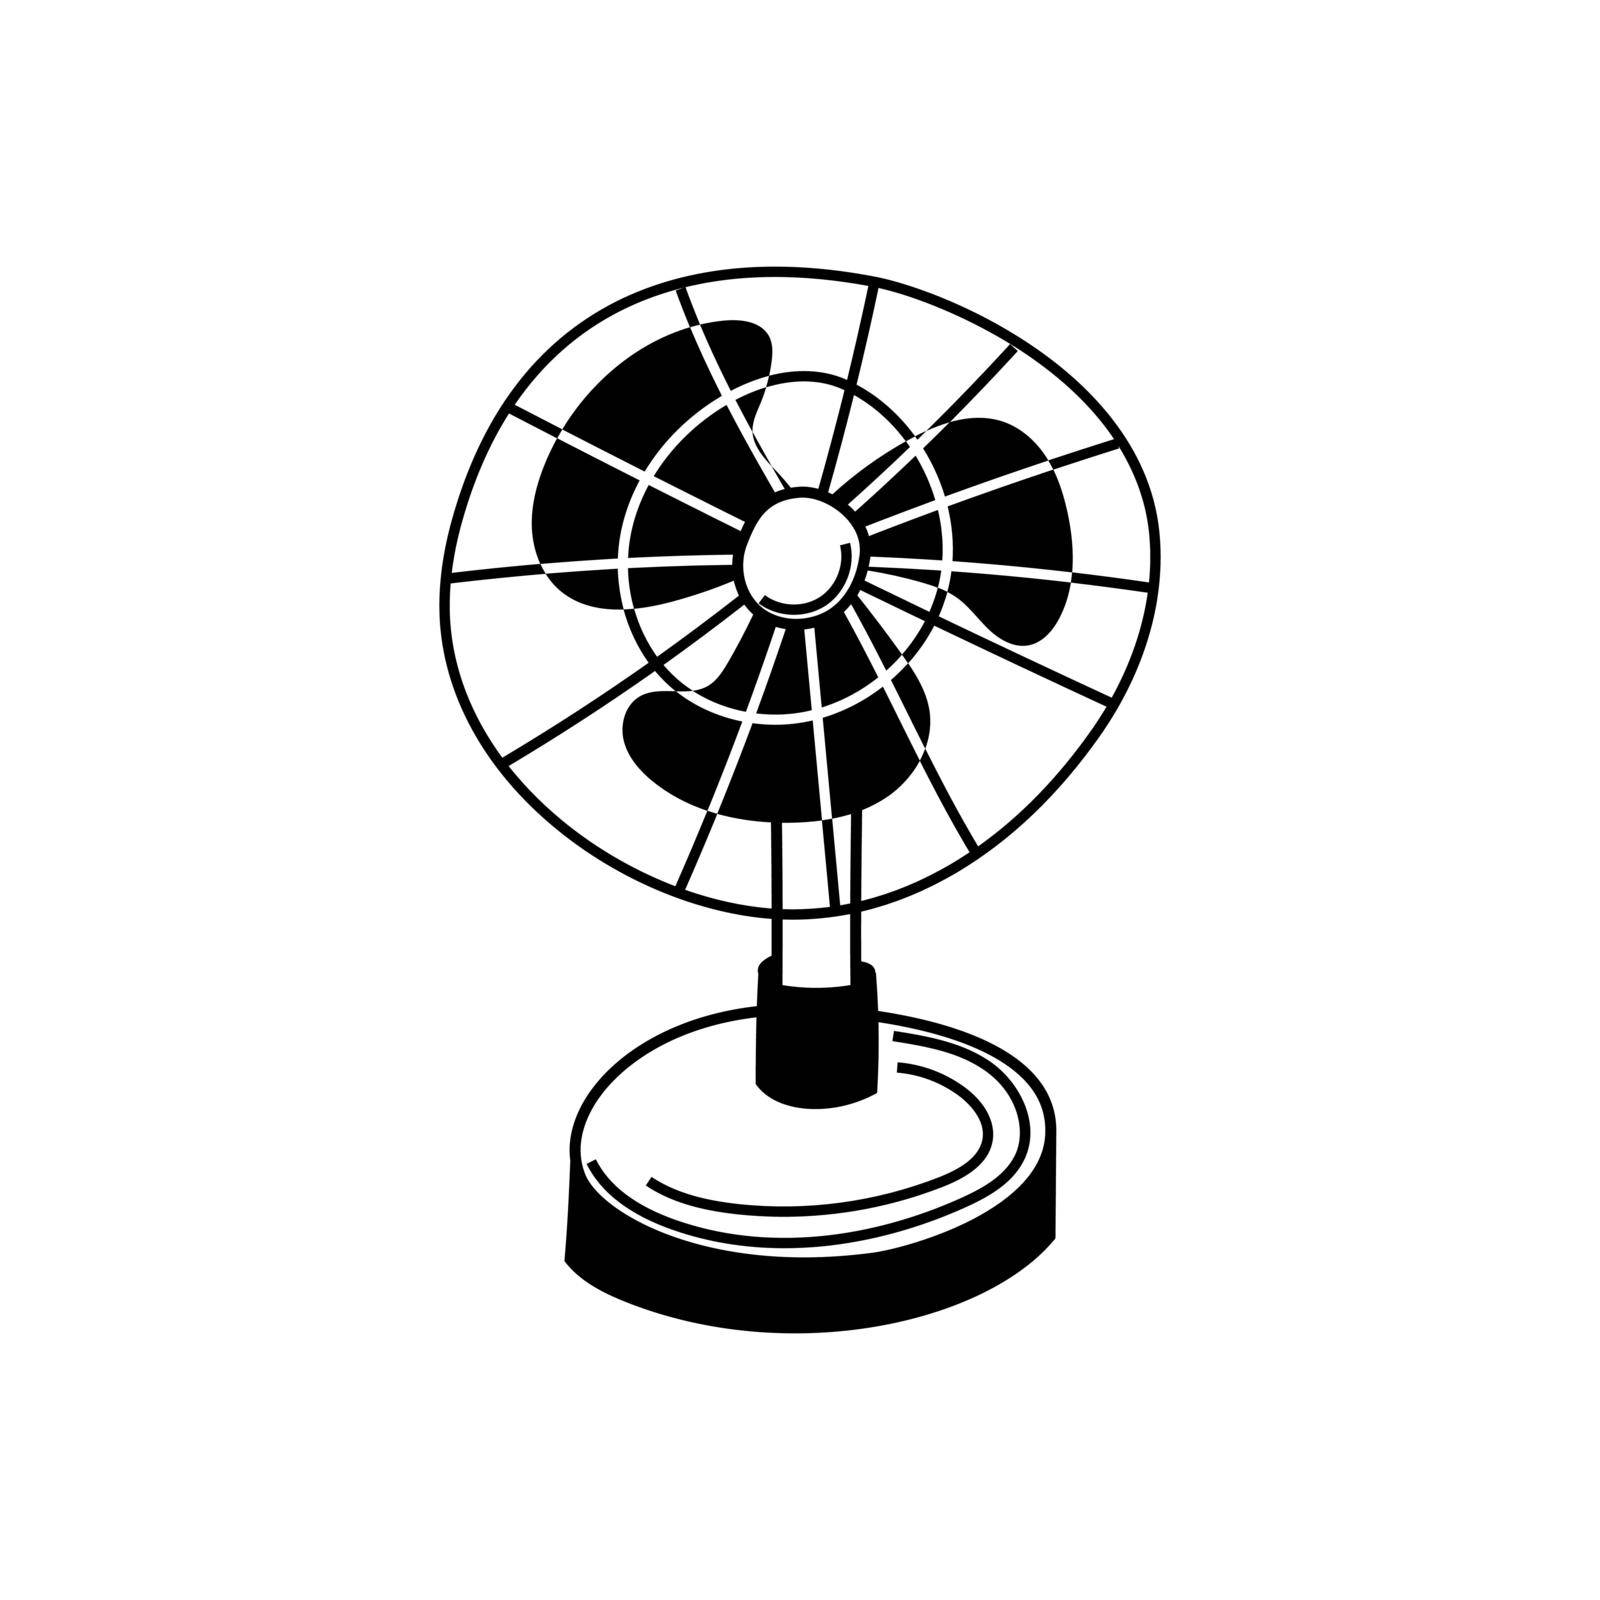 Table fan, black and white by chickfishdoodles